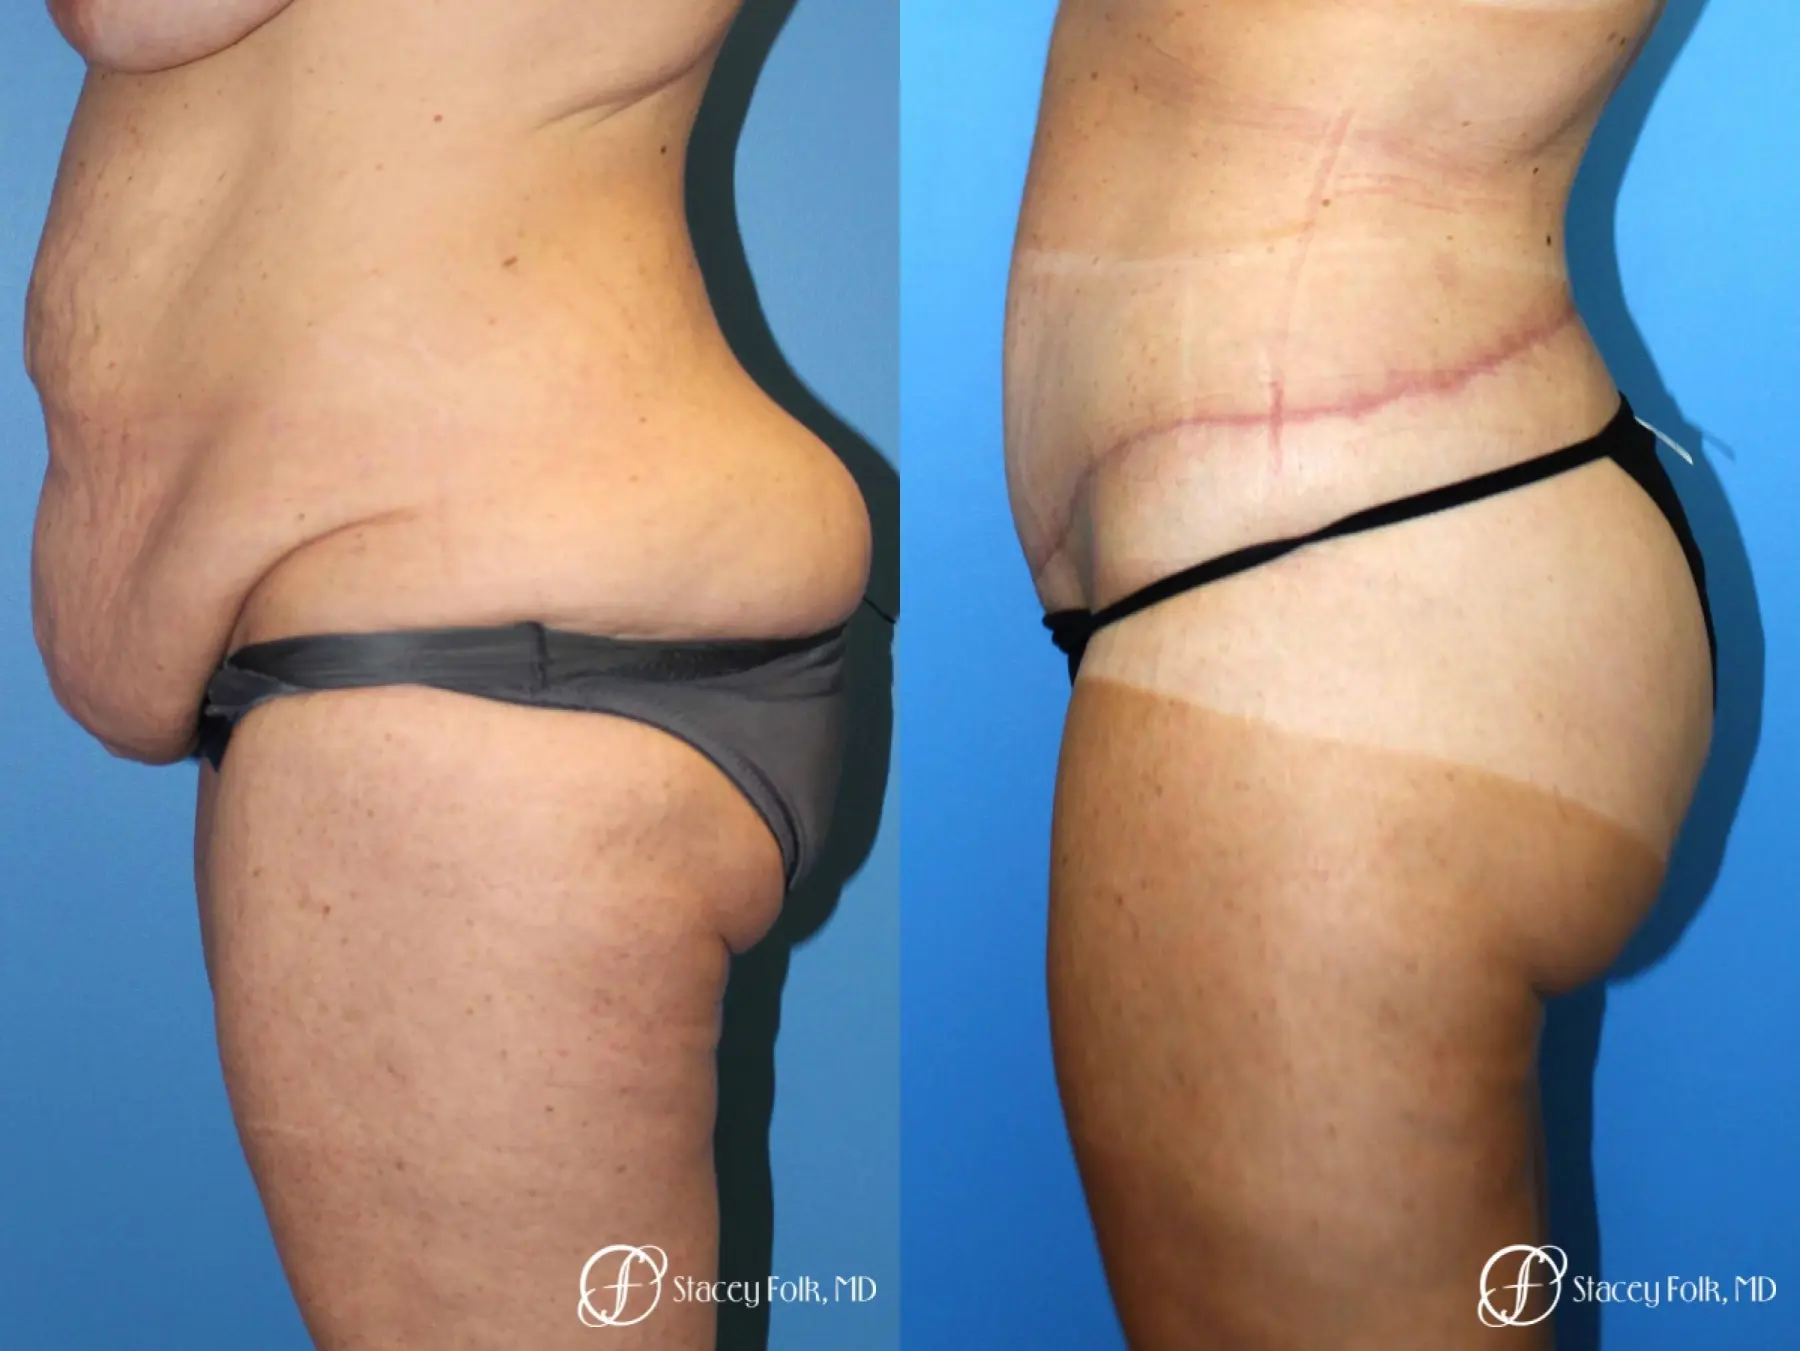 Denver Body Lift belt lipectomy, liposuction, mastopexy 5935 - Before and After 3